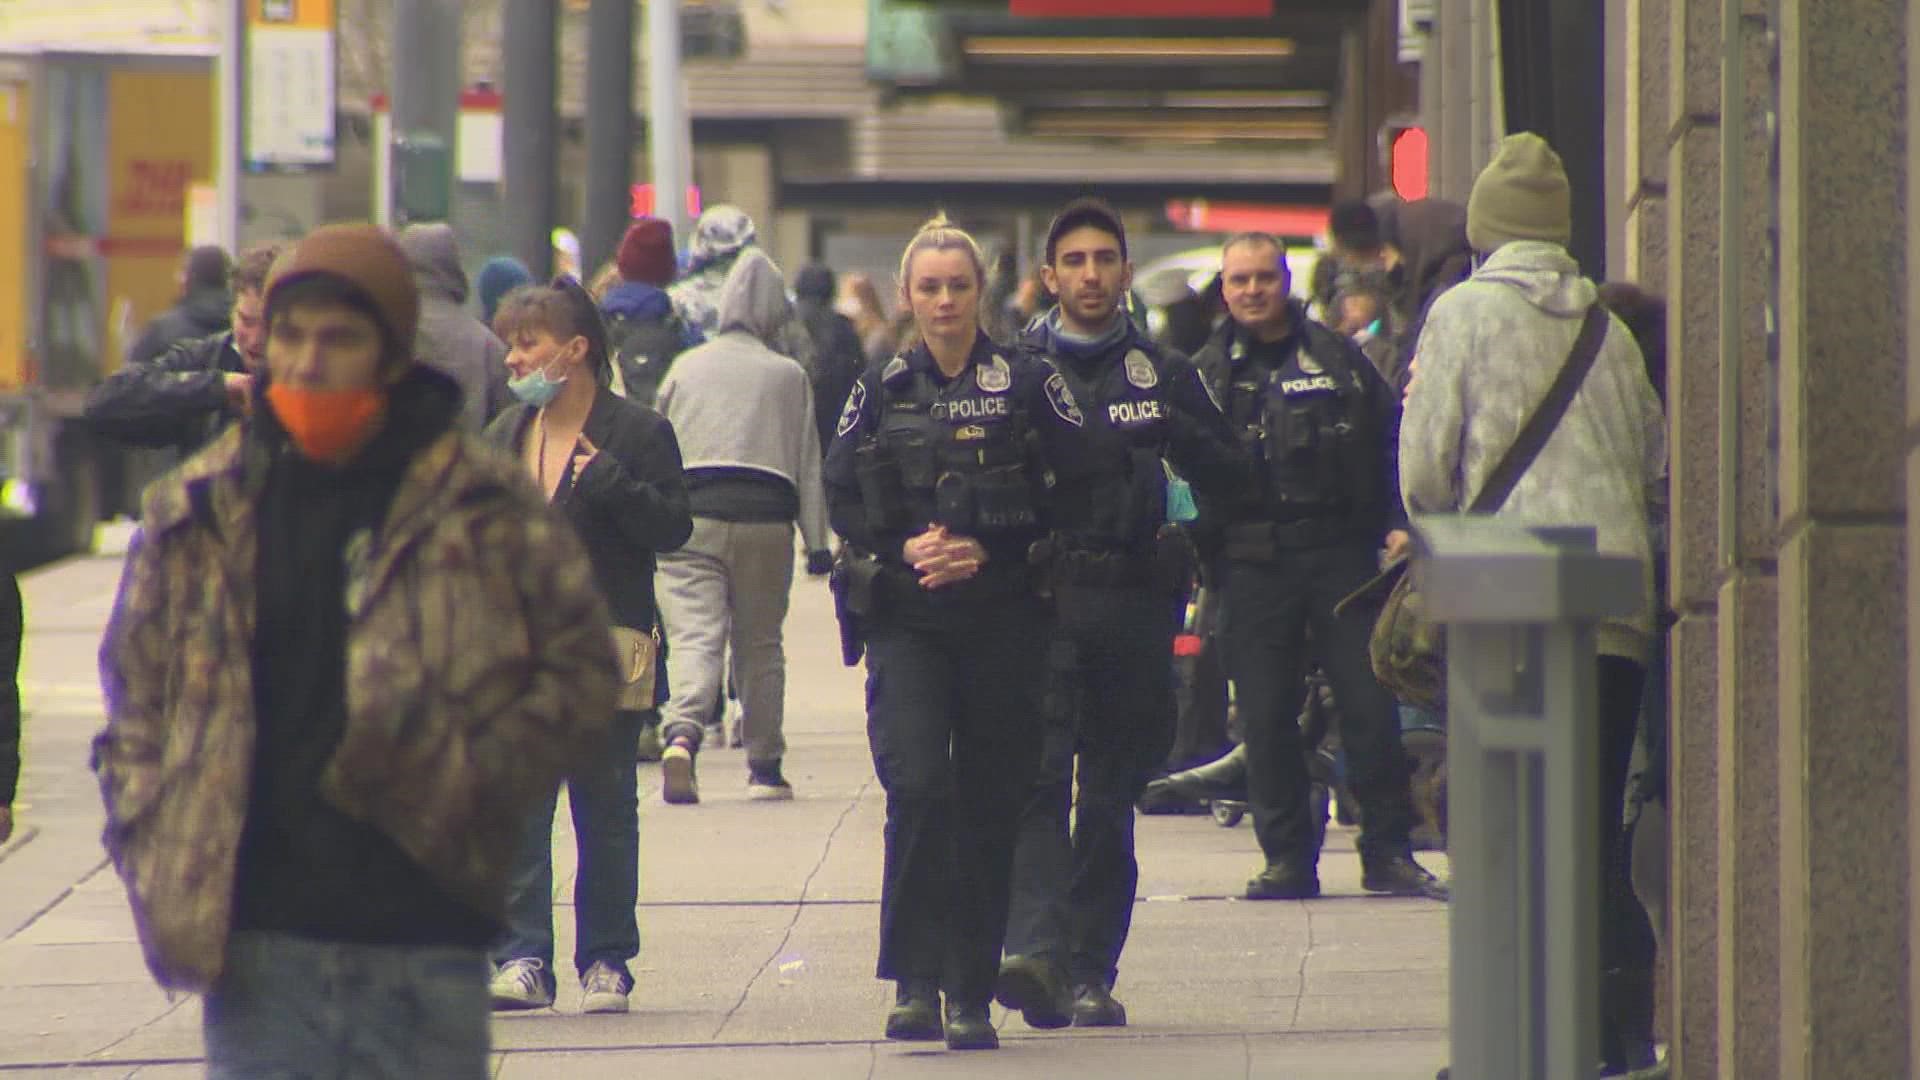 City and regional officials gathered Friday to discuss the rising crime downtown after a chaotic week around Third Avenue and Pike Street.